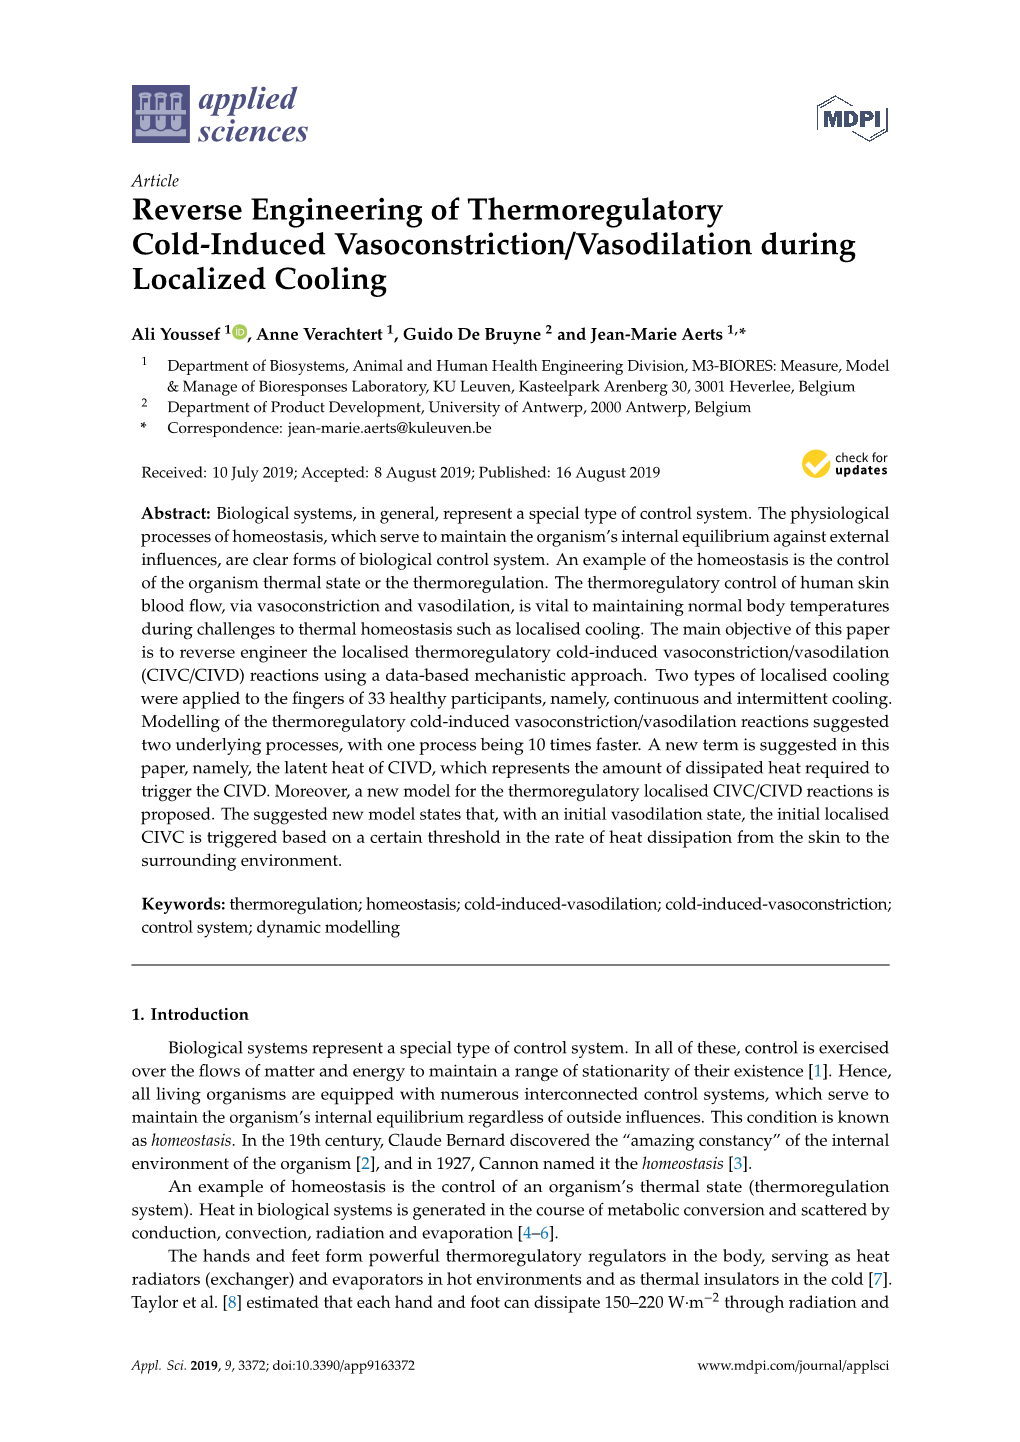 Reverse Engineering of Thermoregulatory Cold-Induced Vasoconstriction/Vasodilation During Localized Cooling